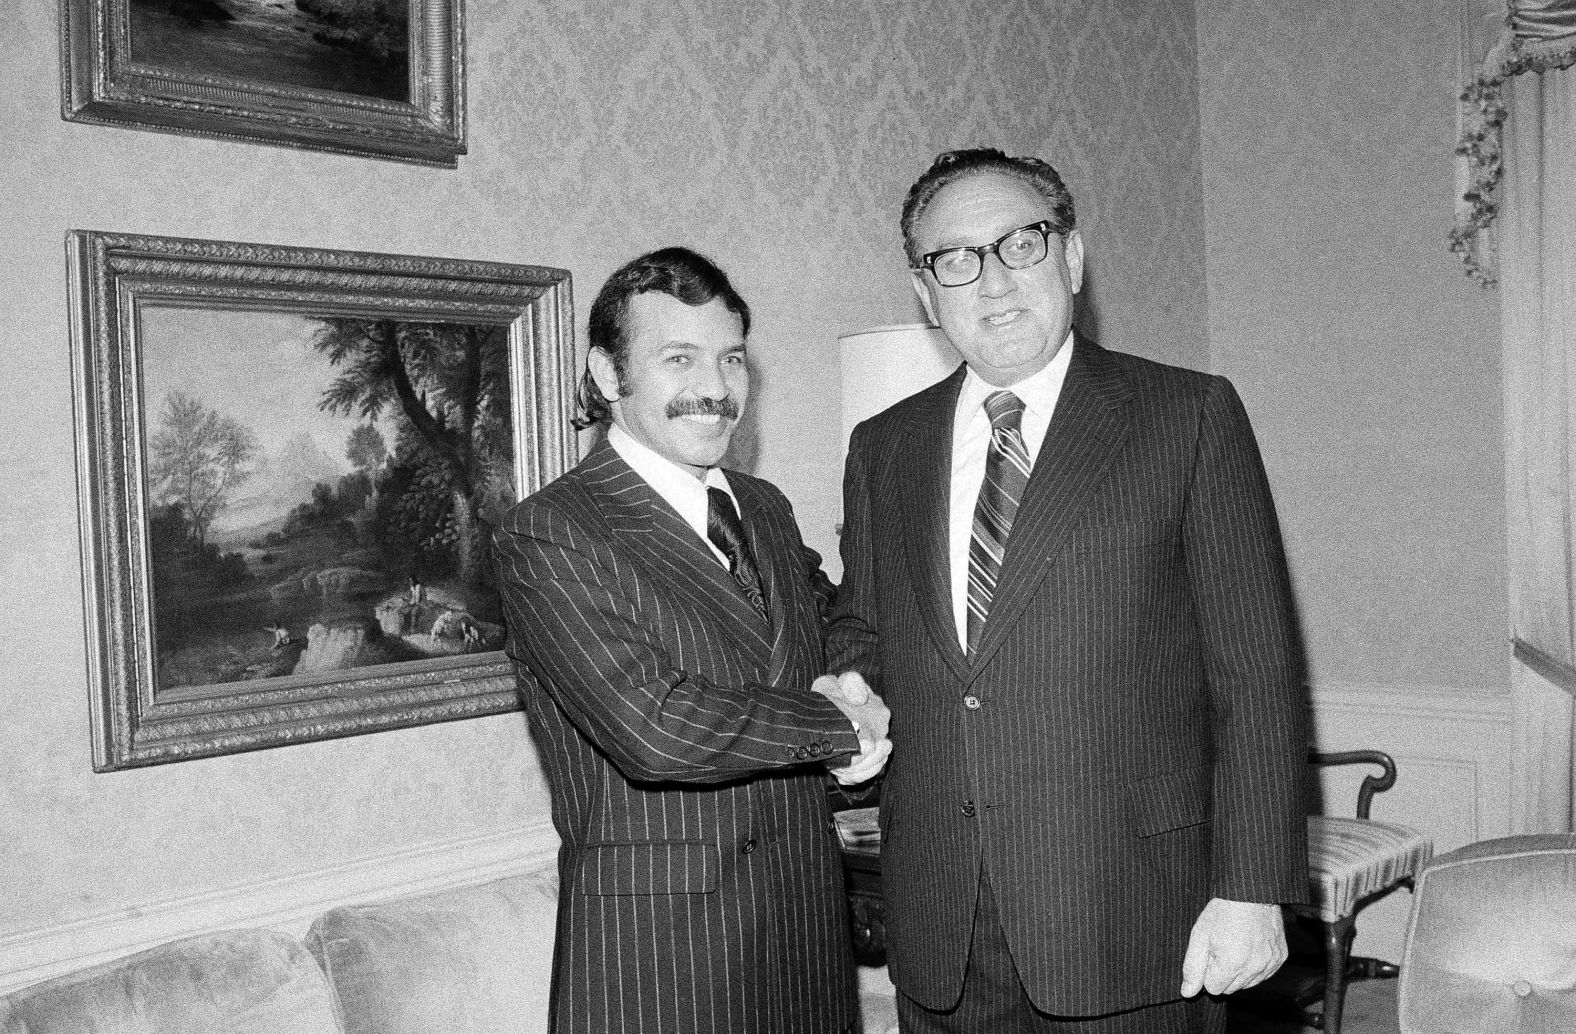 Bouteflika meets with US Secretary of State Henry Kissinger at a hotel in New York in October 1975.